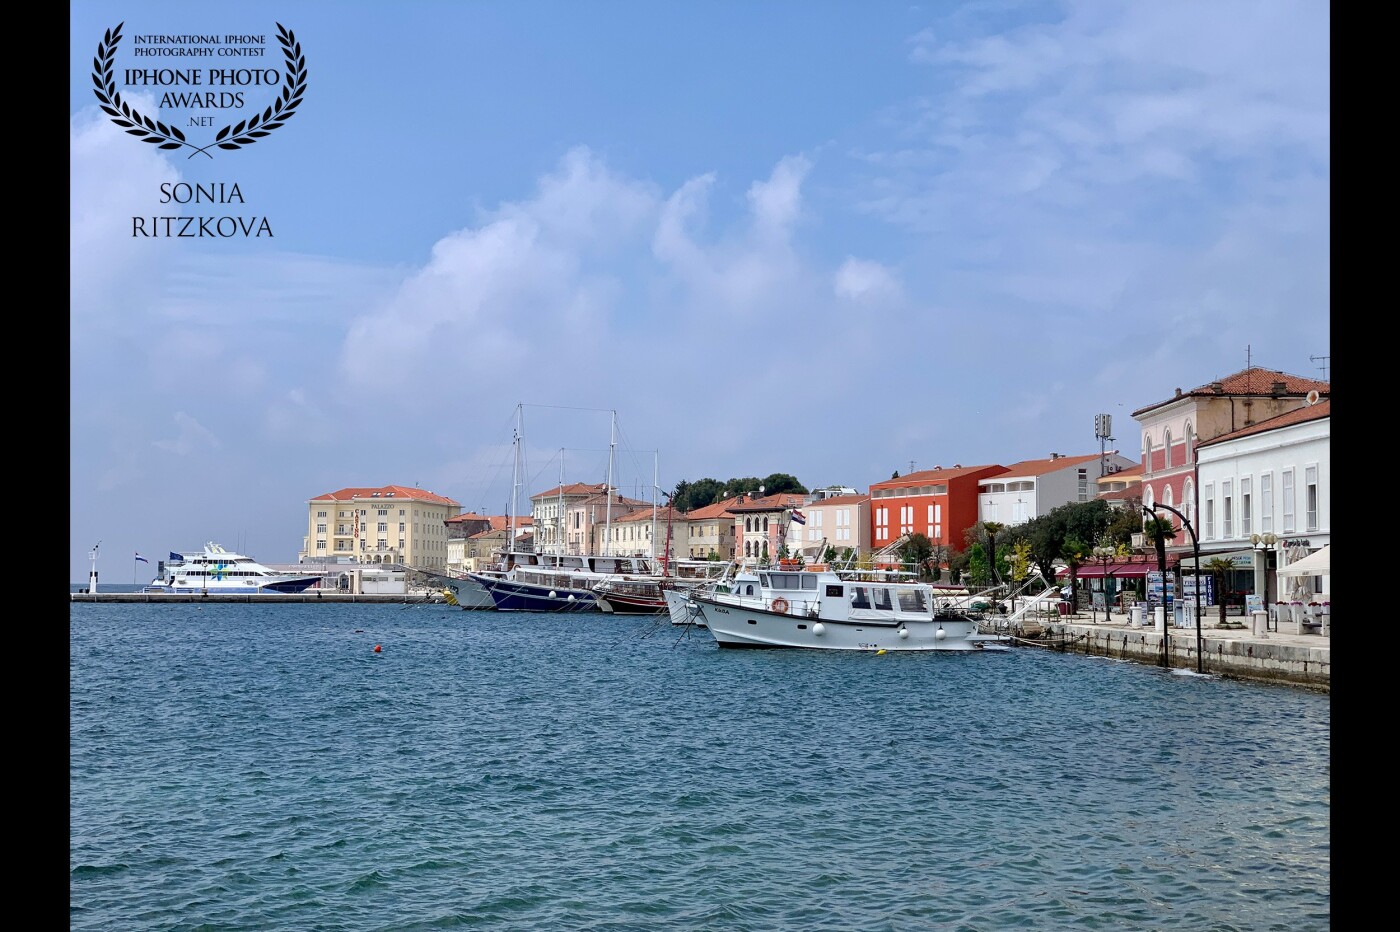 The surroundings of the city Poreč are beautiful. Poreč is a town and municipality on the western coast of the Istrian peninsula, in Istria County, Croatia.